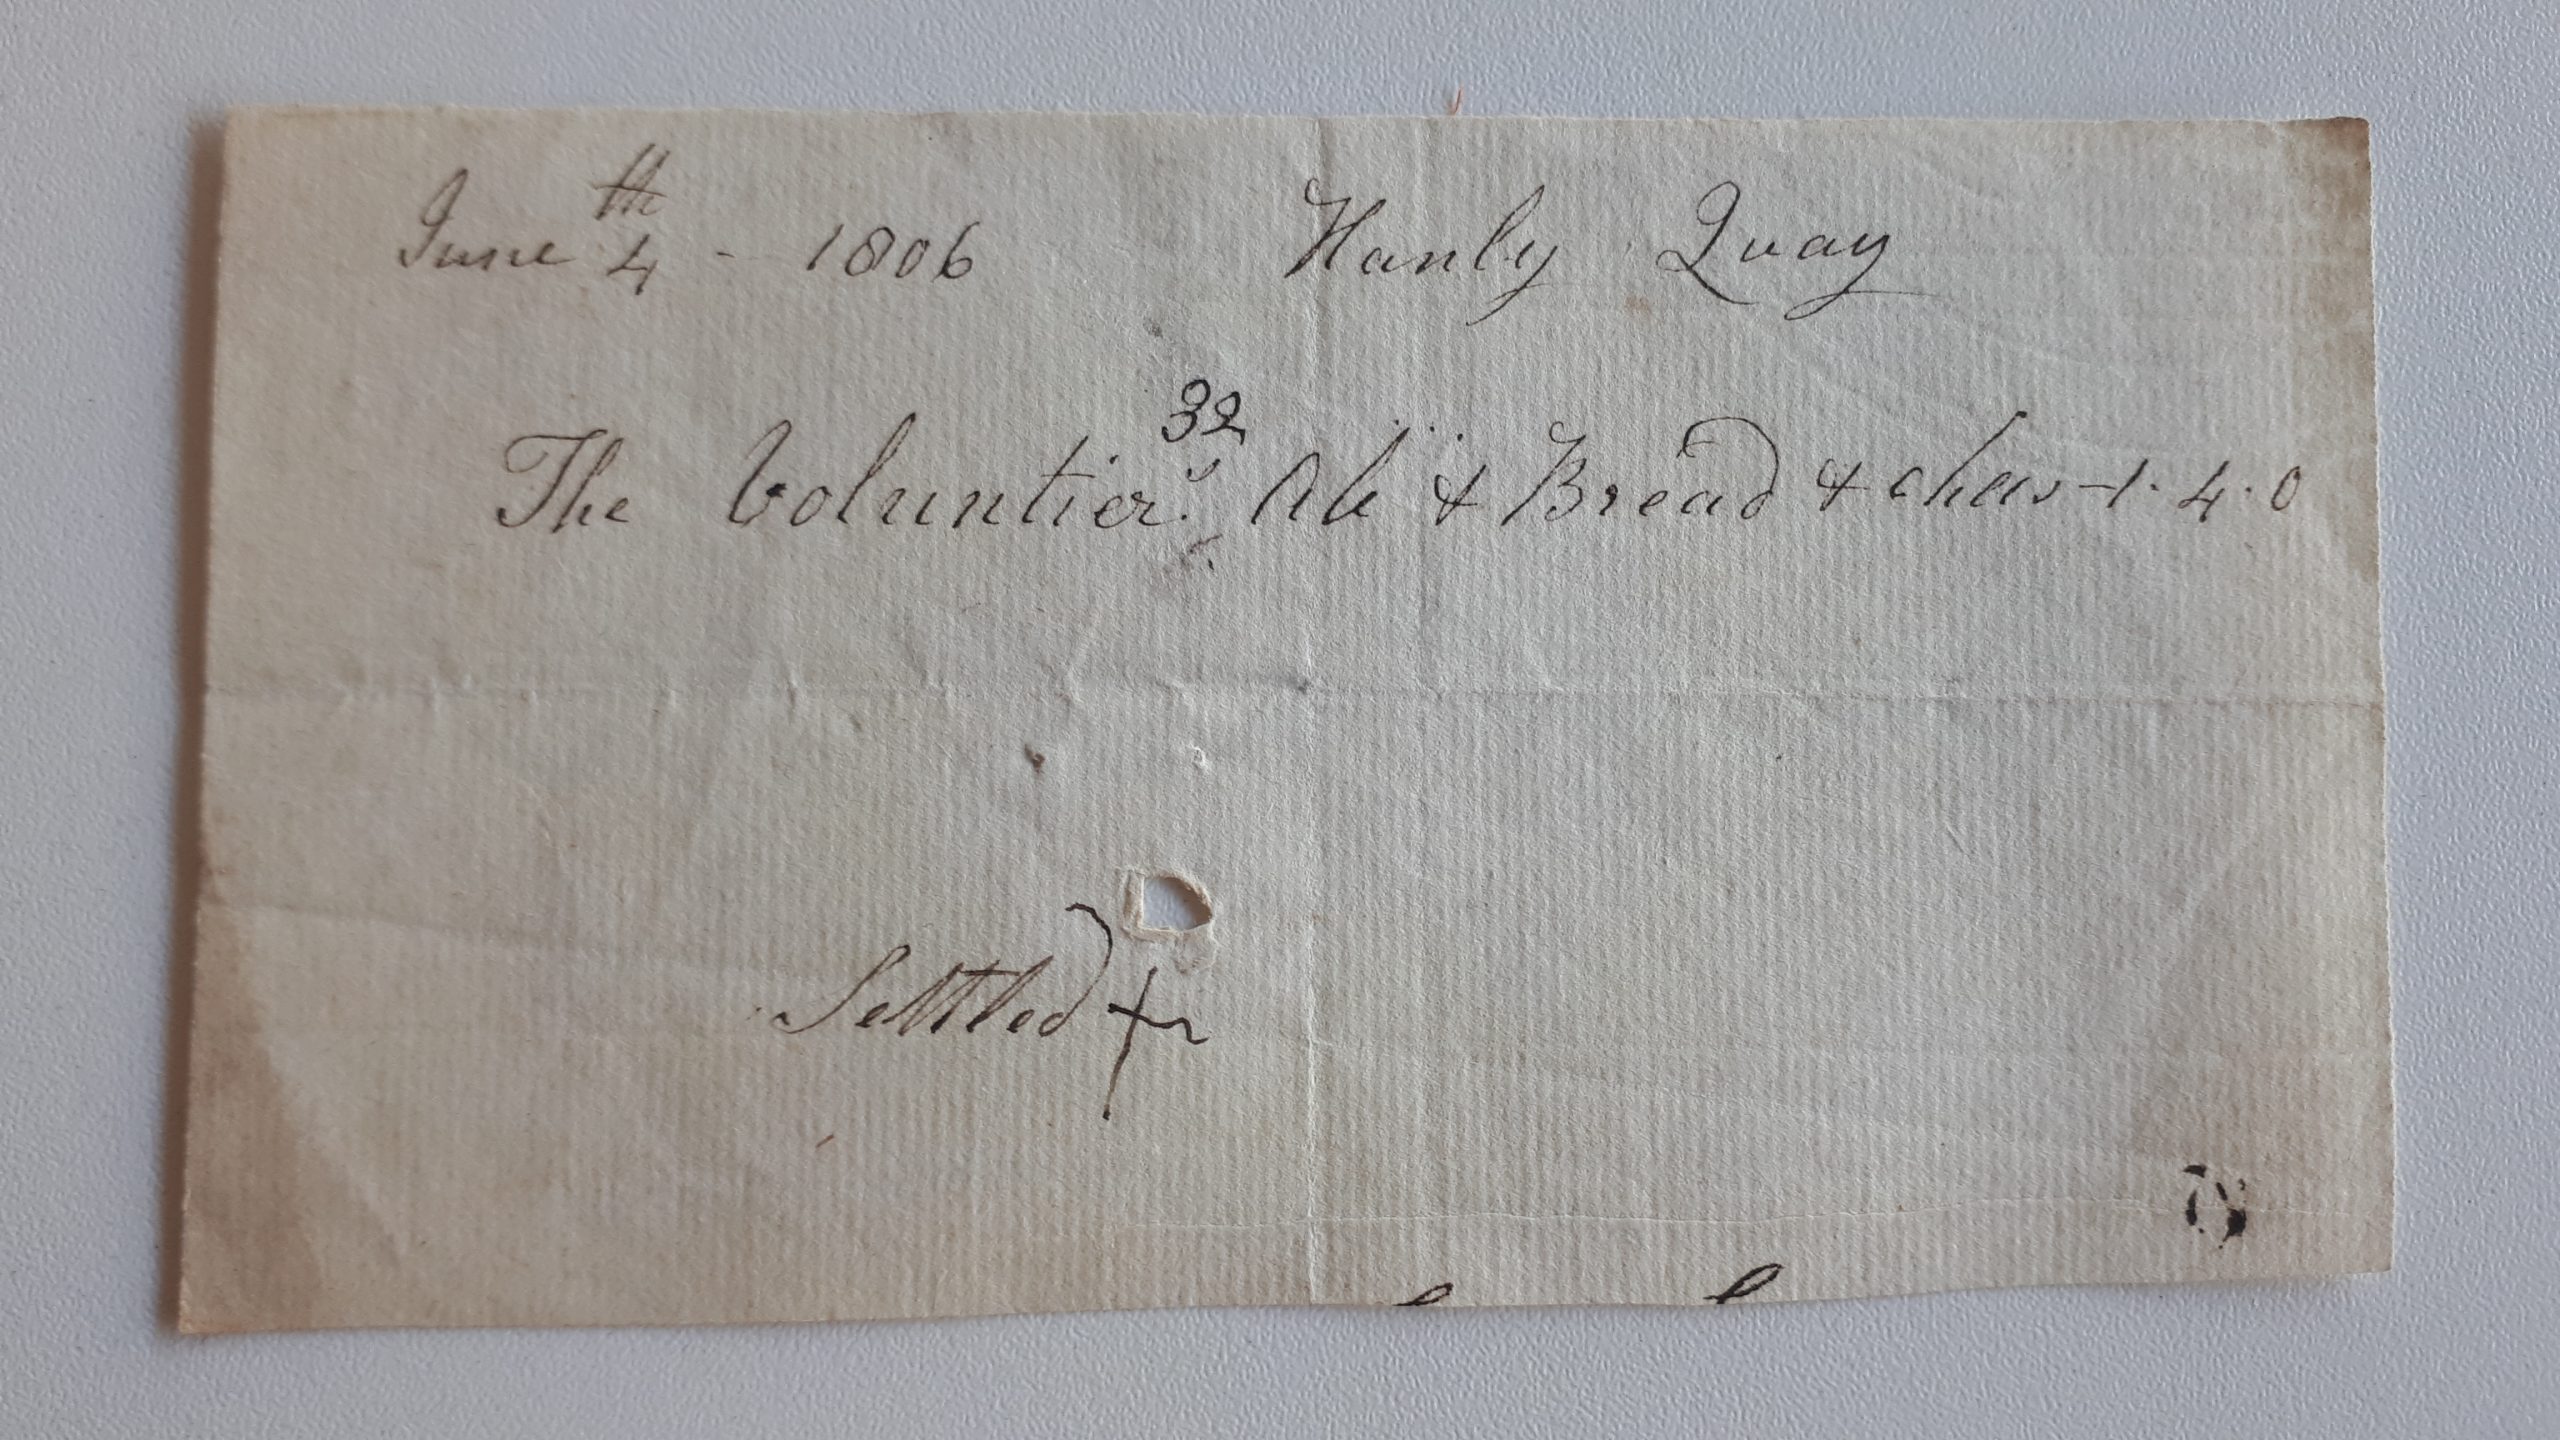 Receipt entitled ‘The Voluntiers ‘32’ [Hanly Quay] ale, bread, and chees[e] – 1.4.0’ [Hanley Castle] Ref 899.975 9276.6(ii) © WAAS